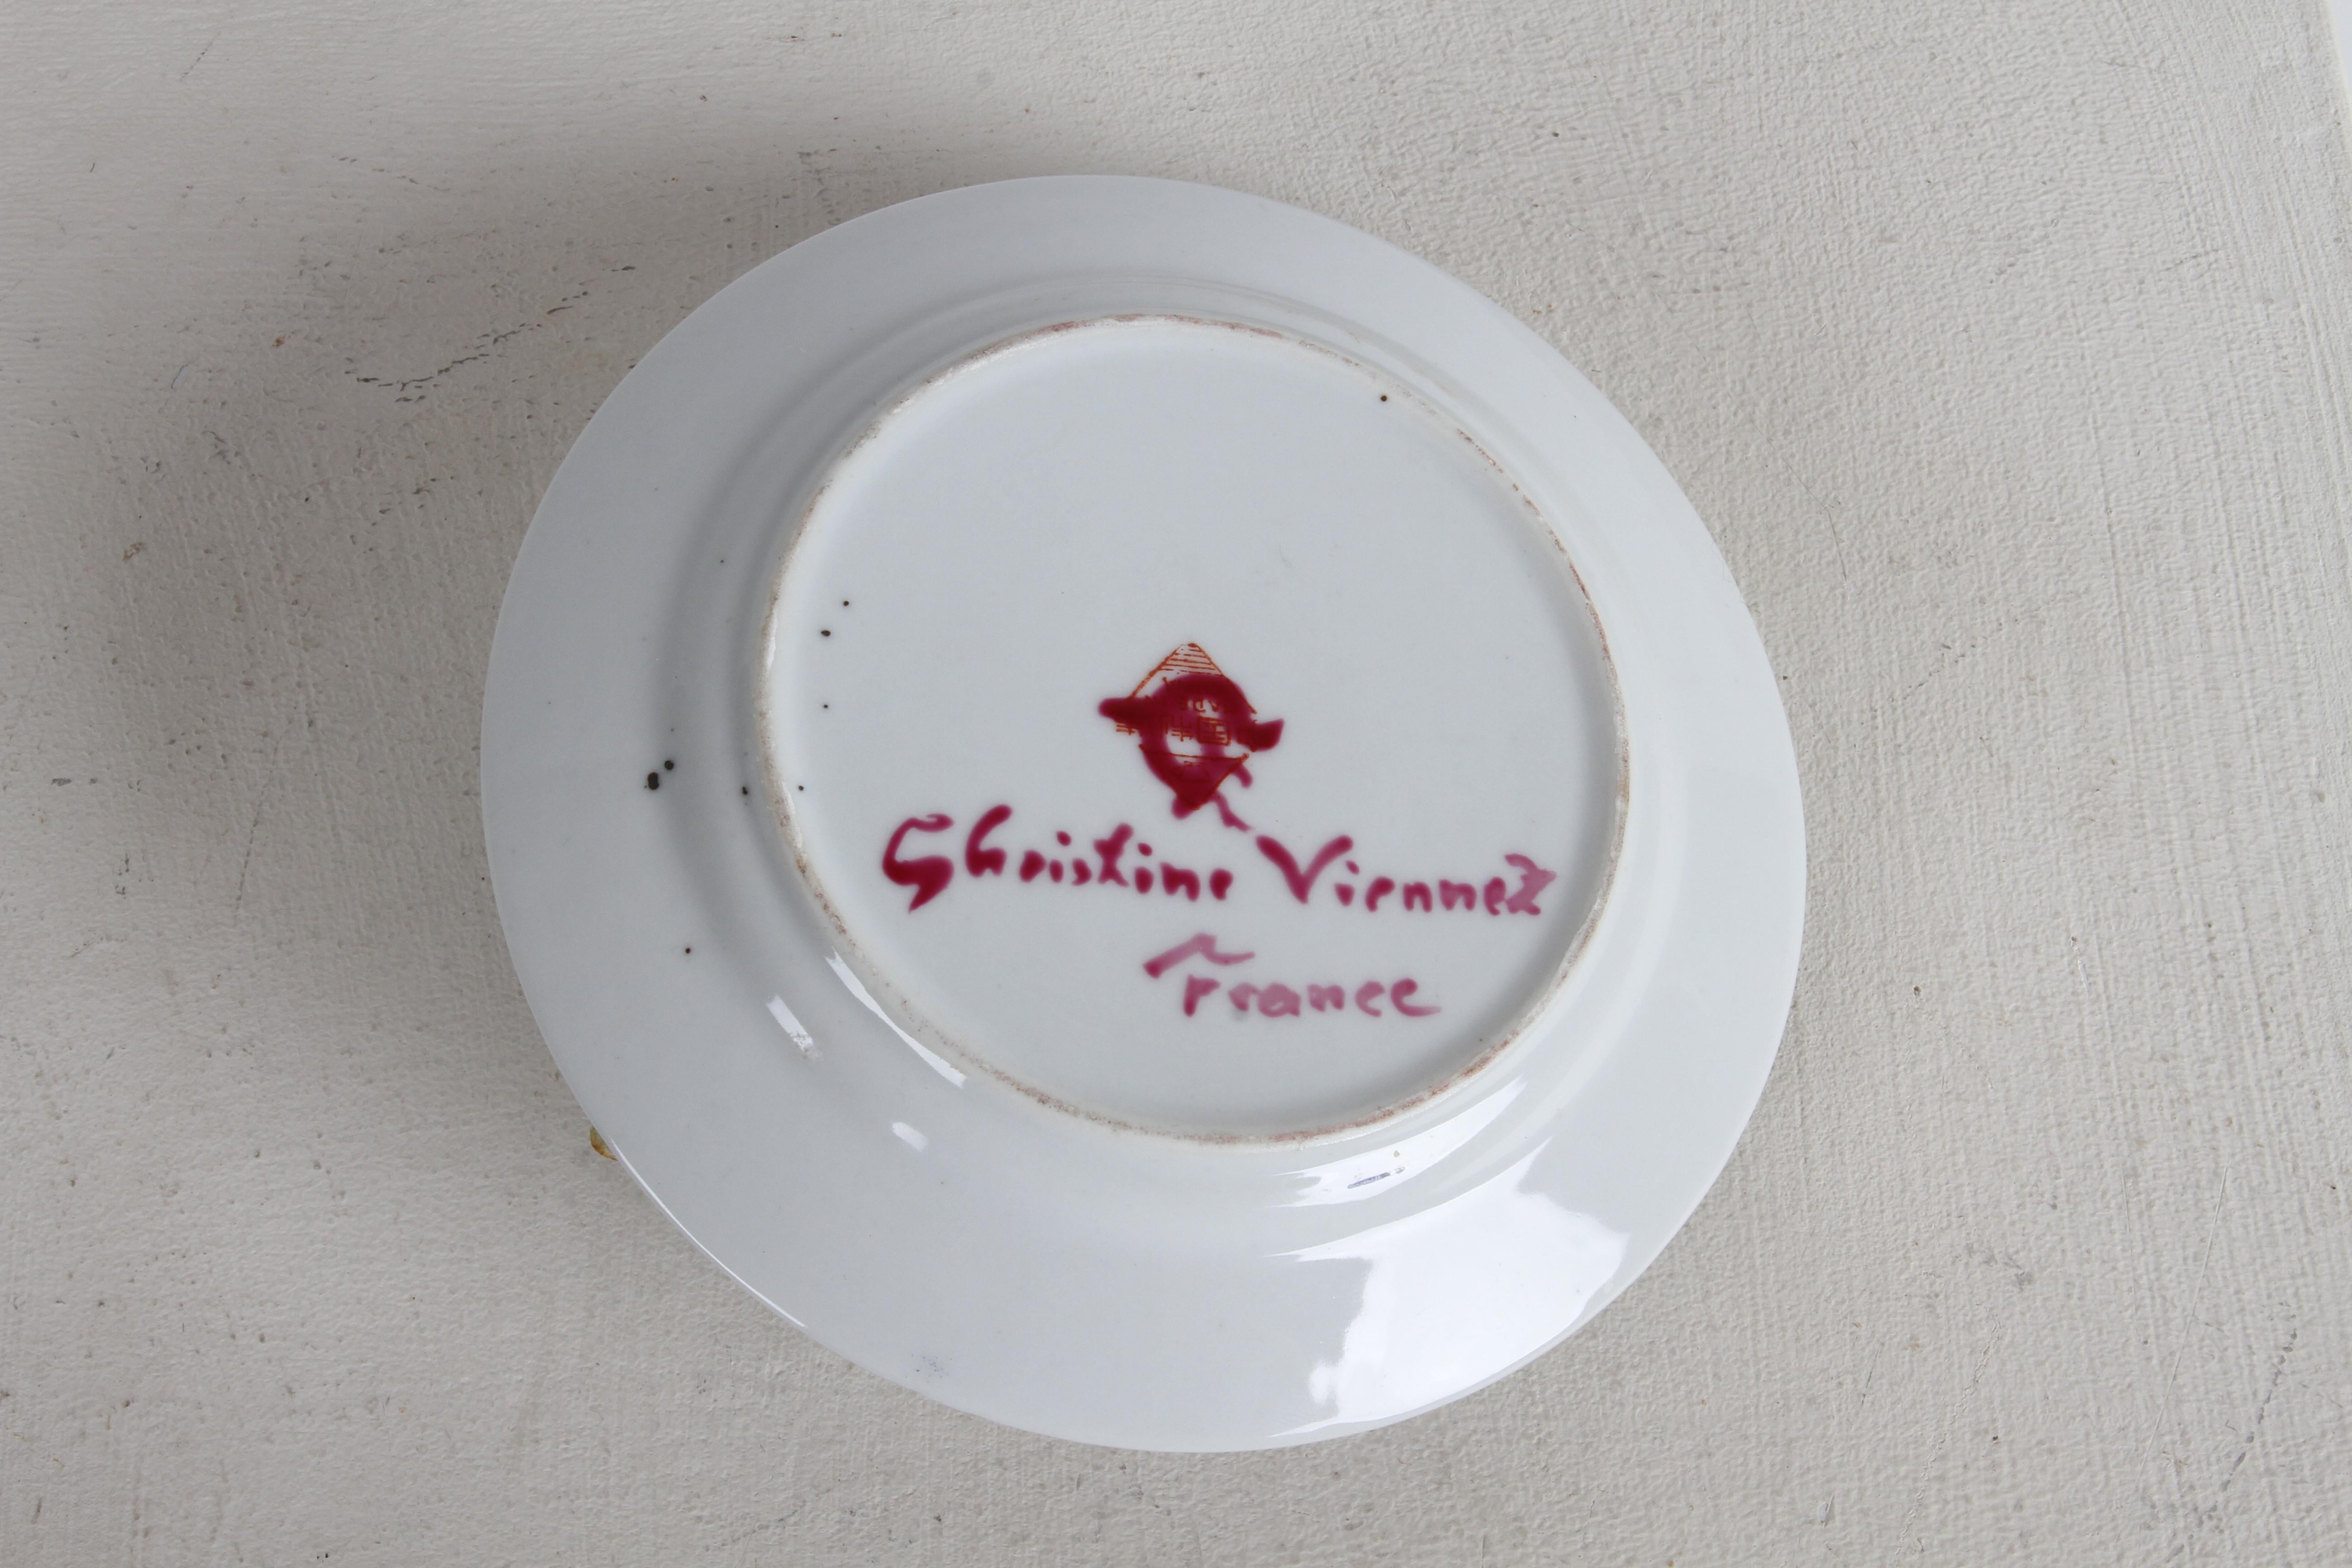 Christine Viennet France Trompe L'oeil Hand Crafted Art Plate - Star Apple Fruit For Sale 3